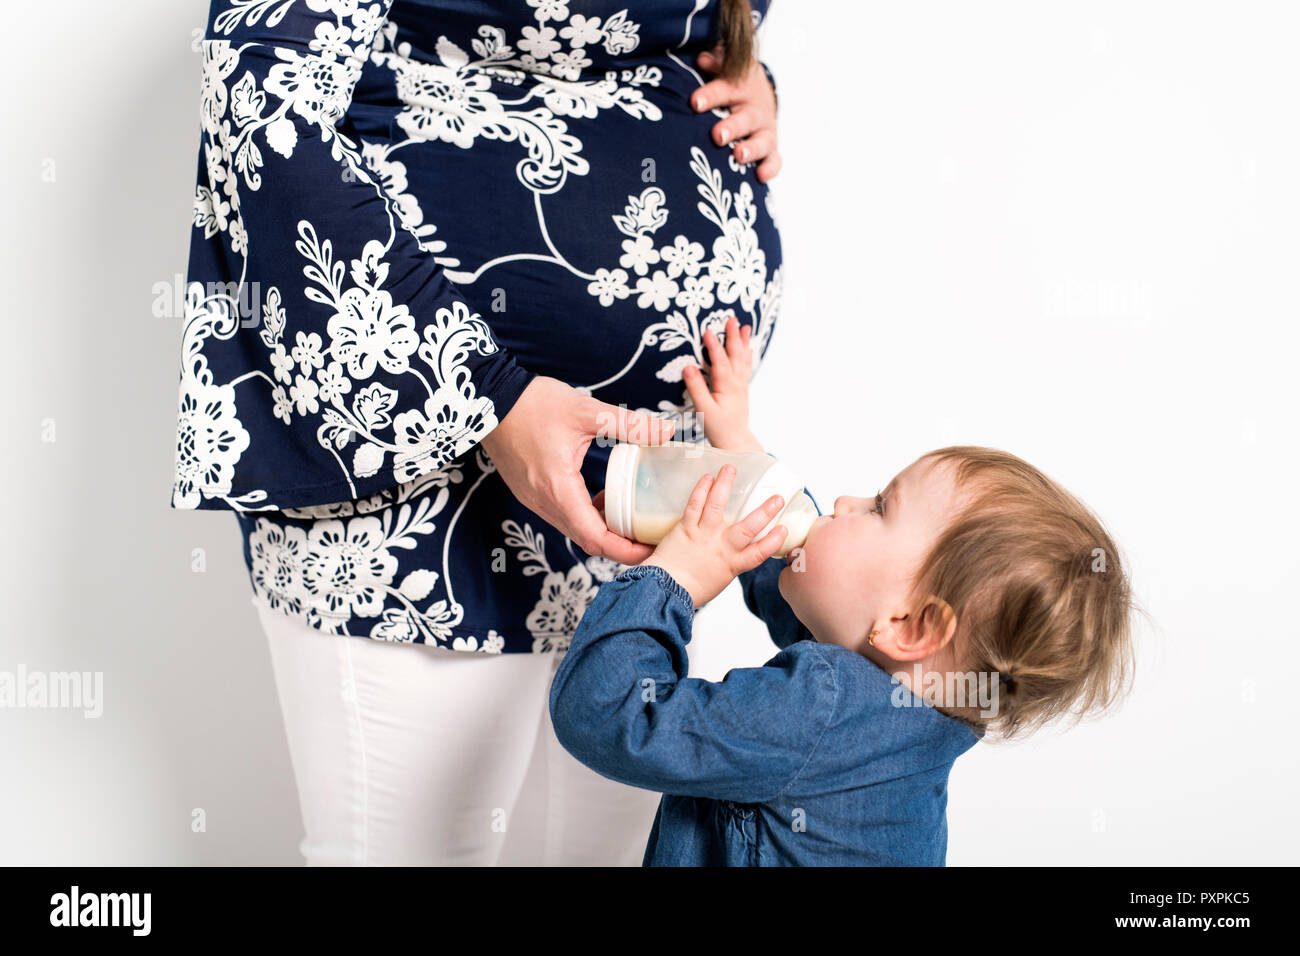 Portrait of a pregnant woman with baby child drink milk bottle Stock Photo